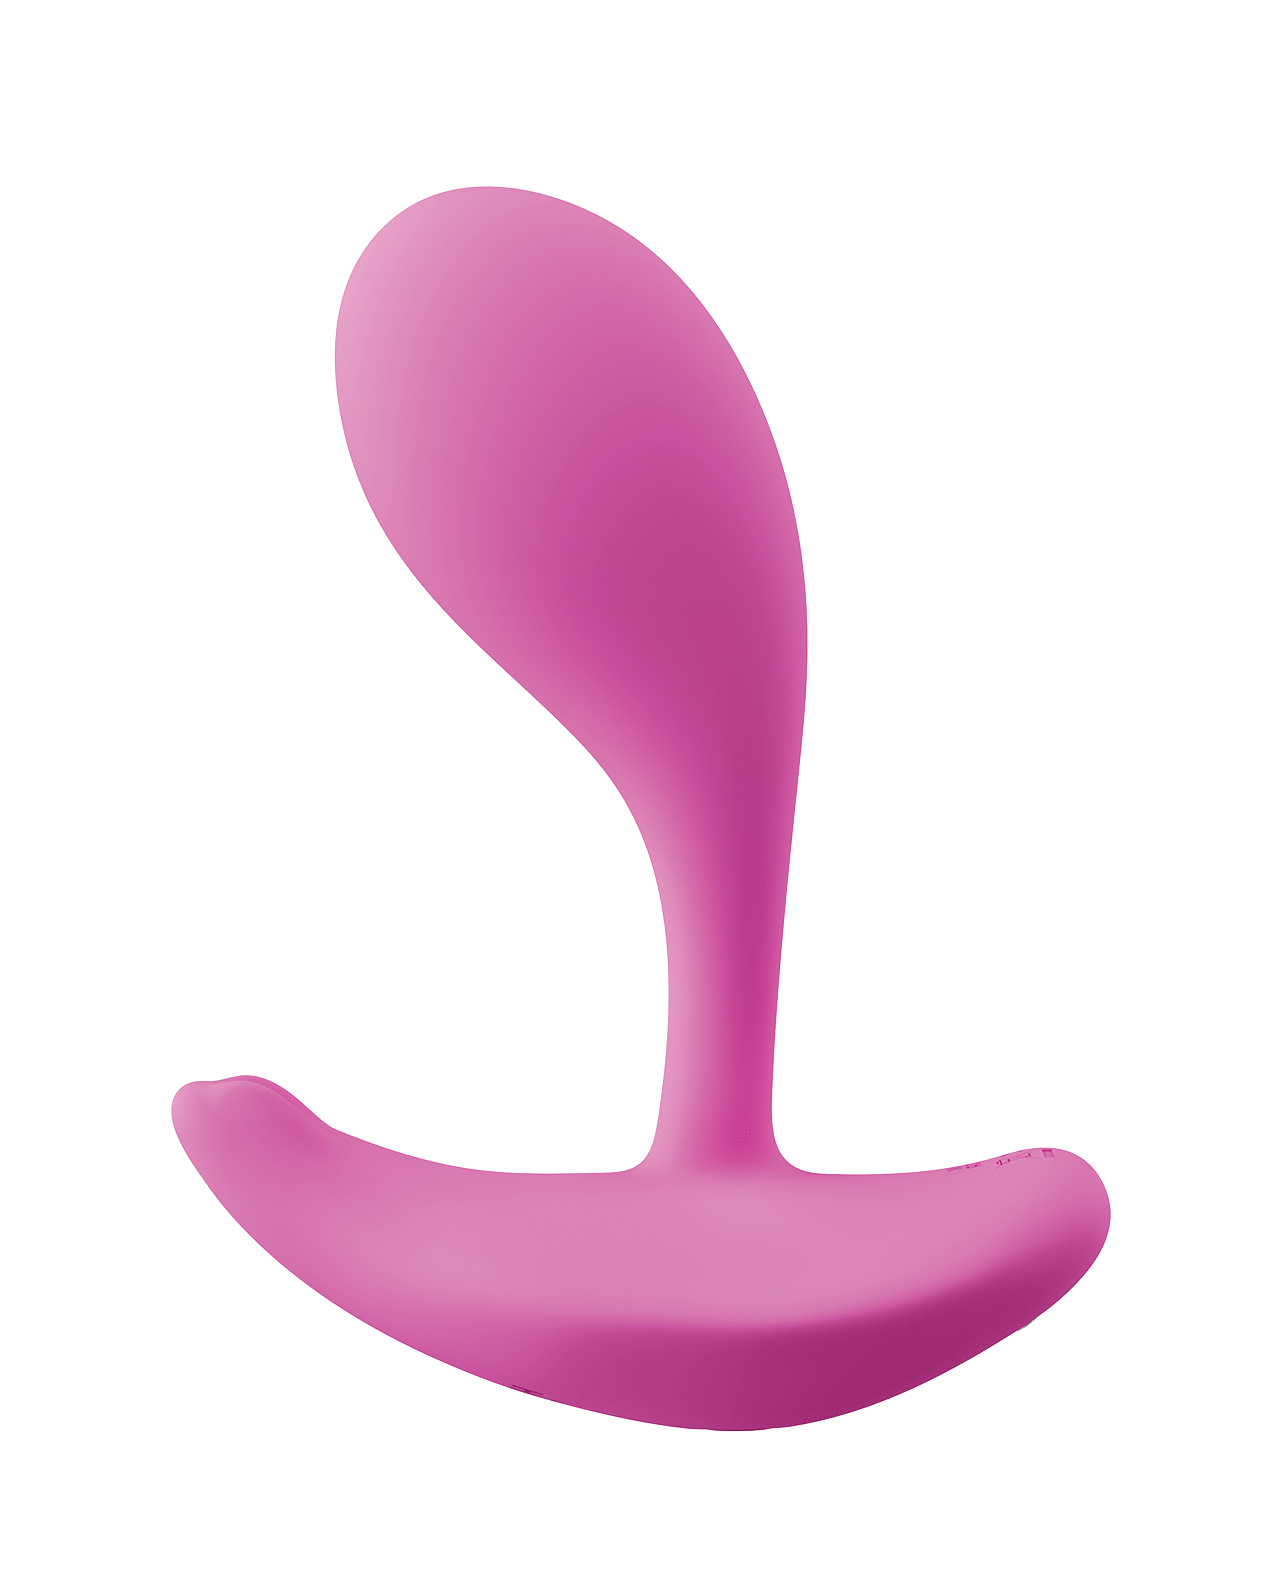 Oly App-Enabled Wearable Clit & G Spot Vibrator - Pink